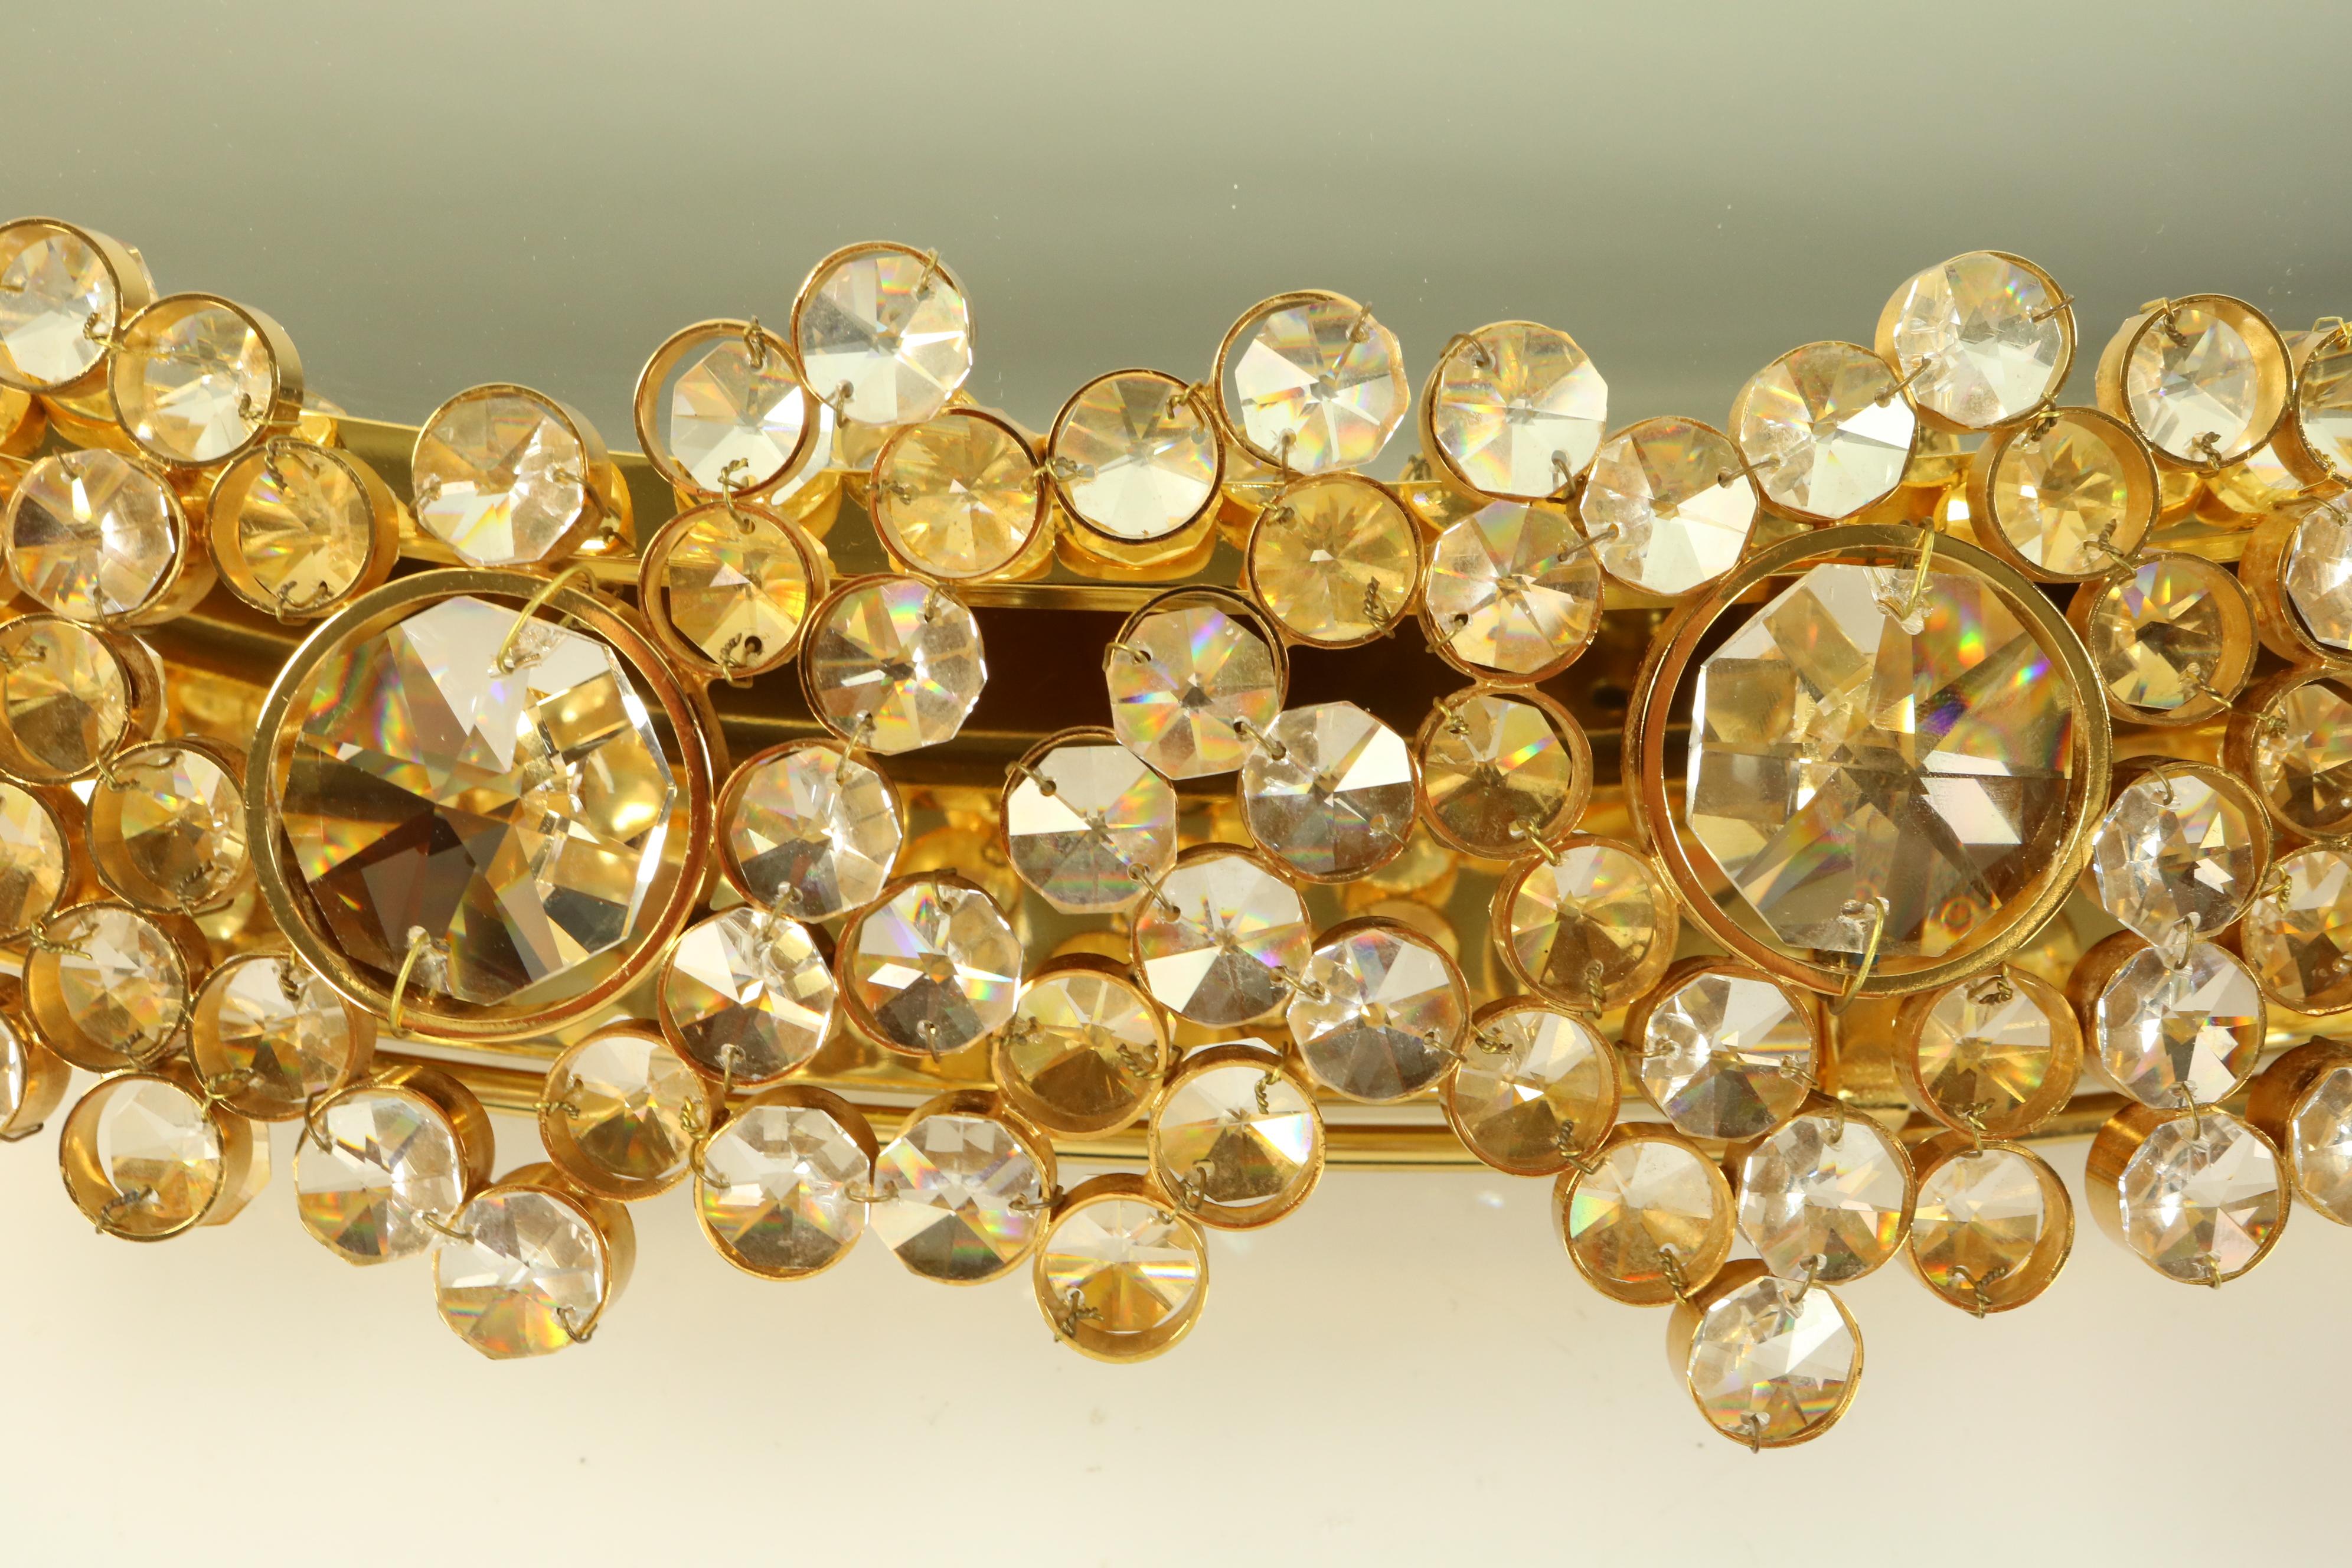 Iluminated Palwa Mirror Faceted Glass Diamonds in Gilded Brass, 1960s Vintage im Angebot 2